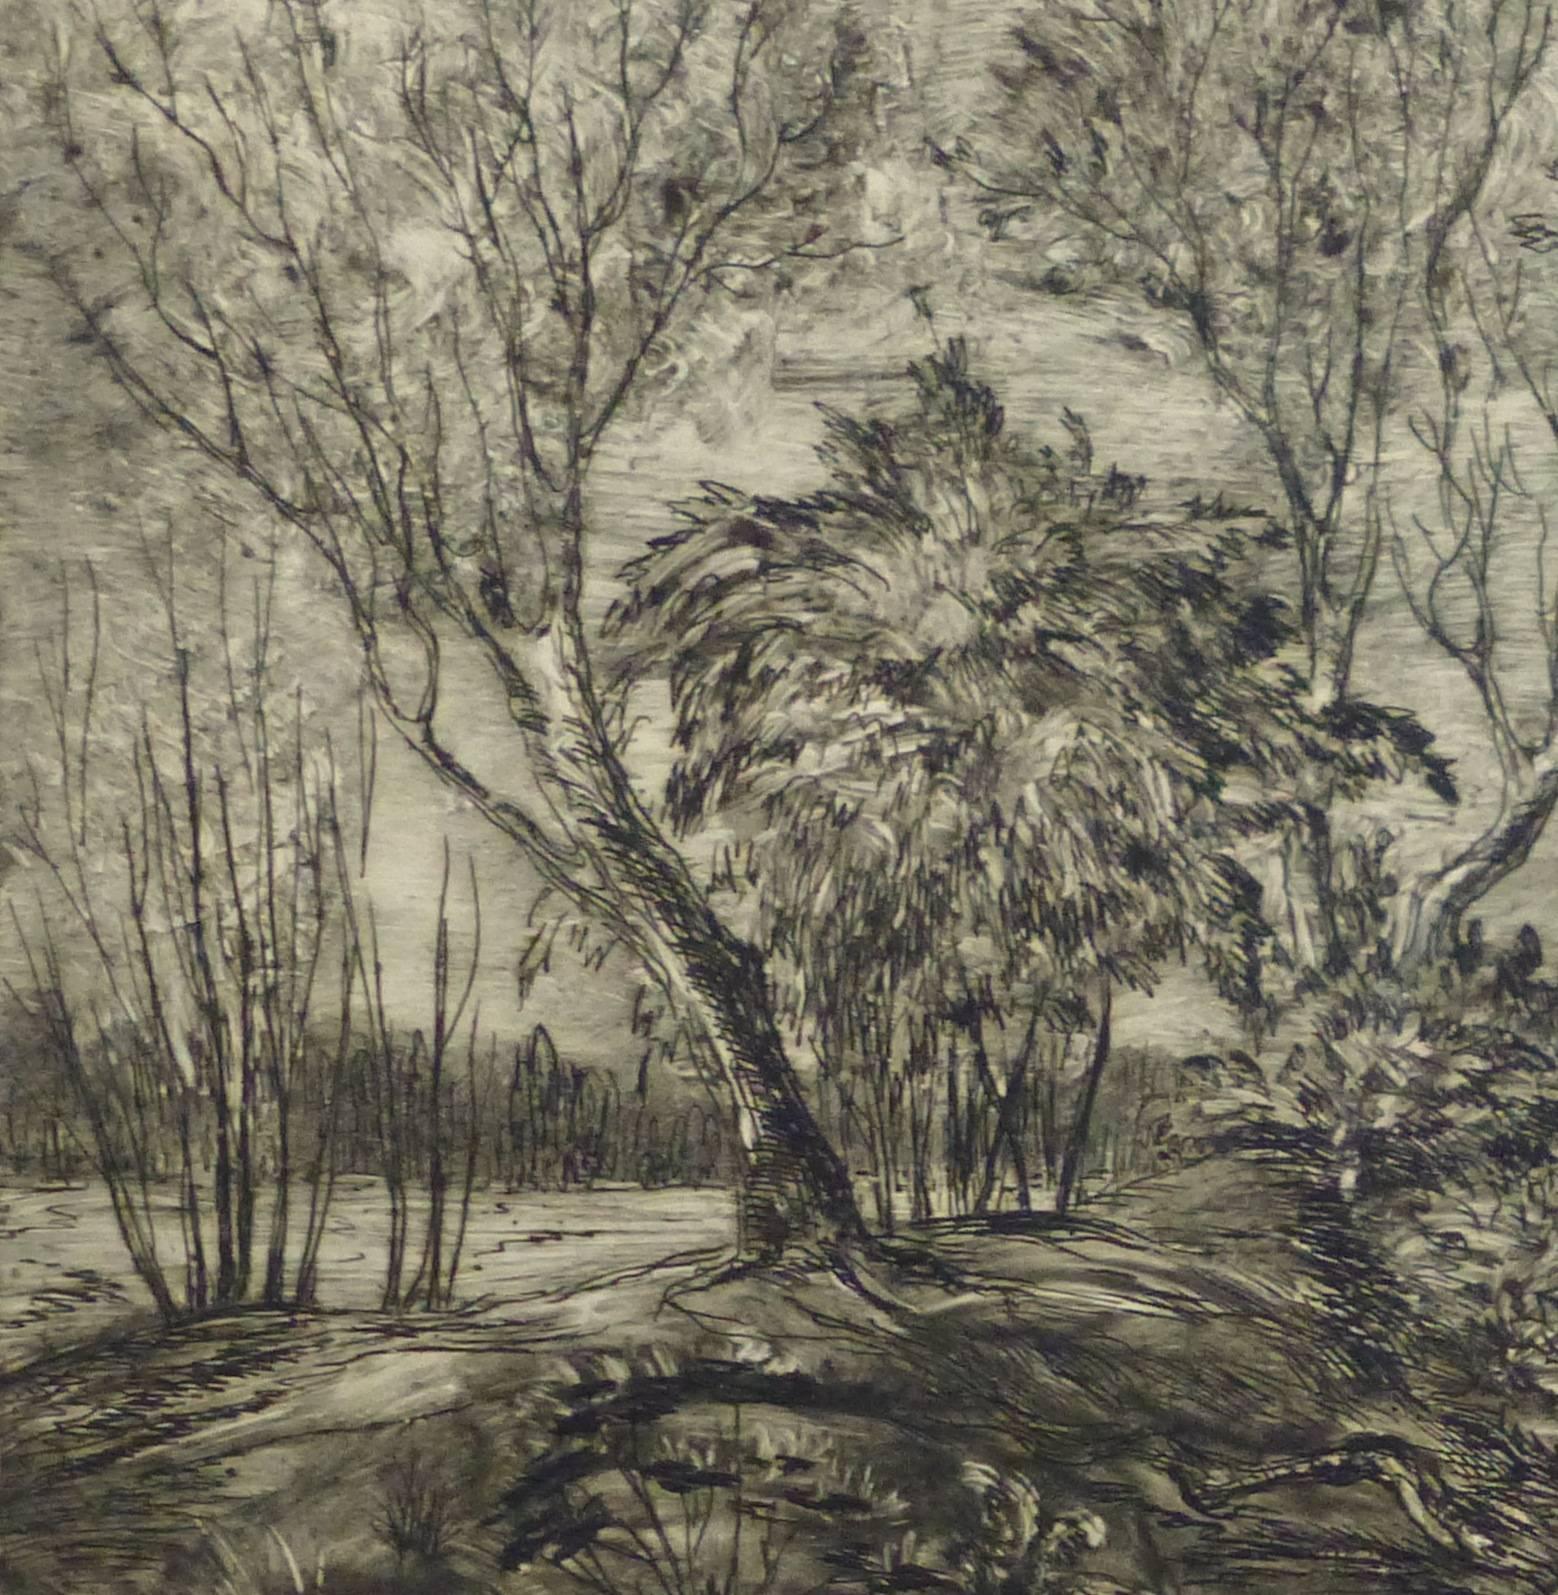 Vintage Etching - Curving Trees by the Riverside - Print by V. Gourianov